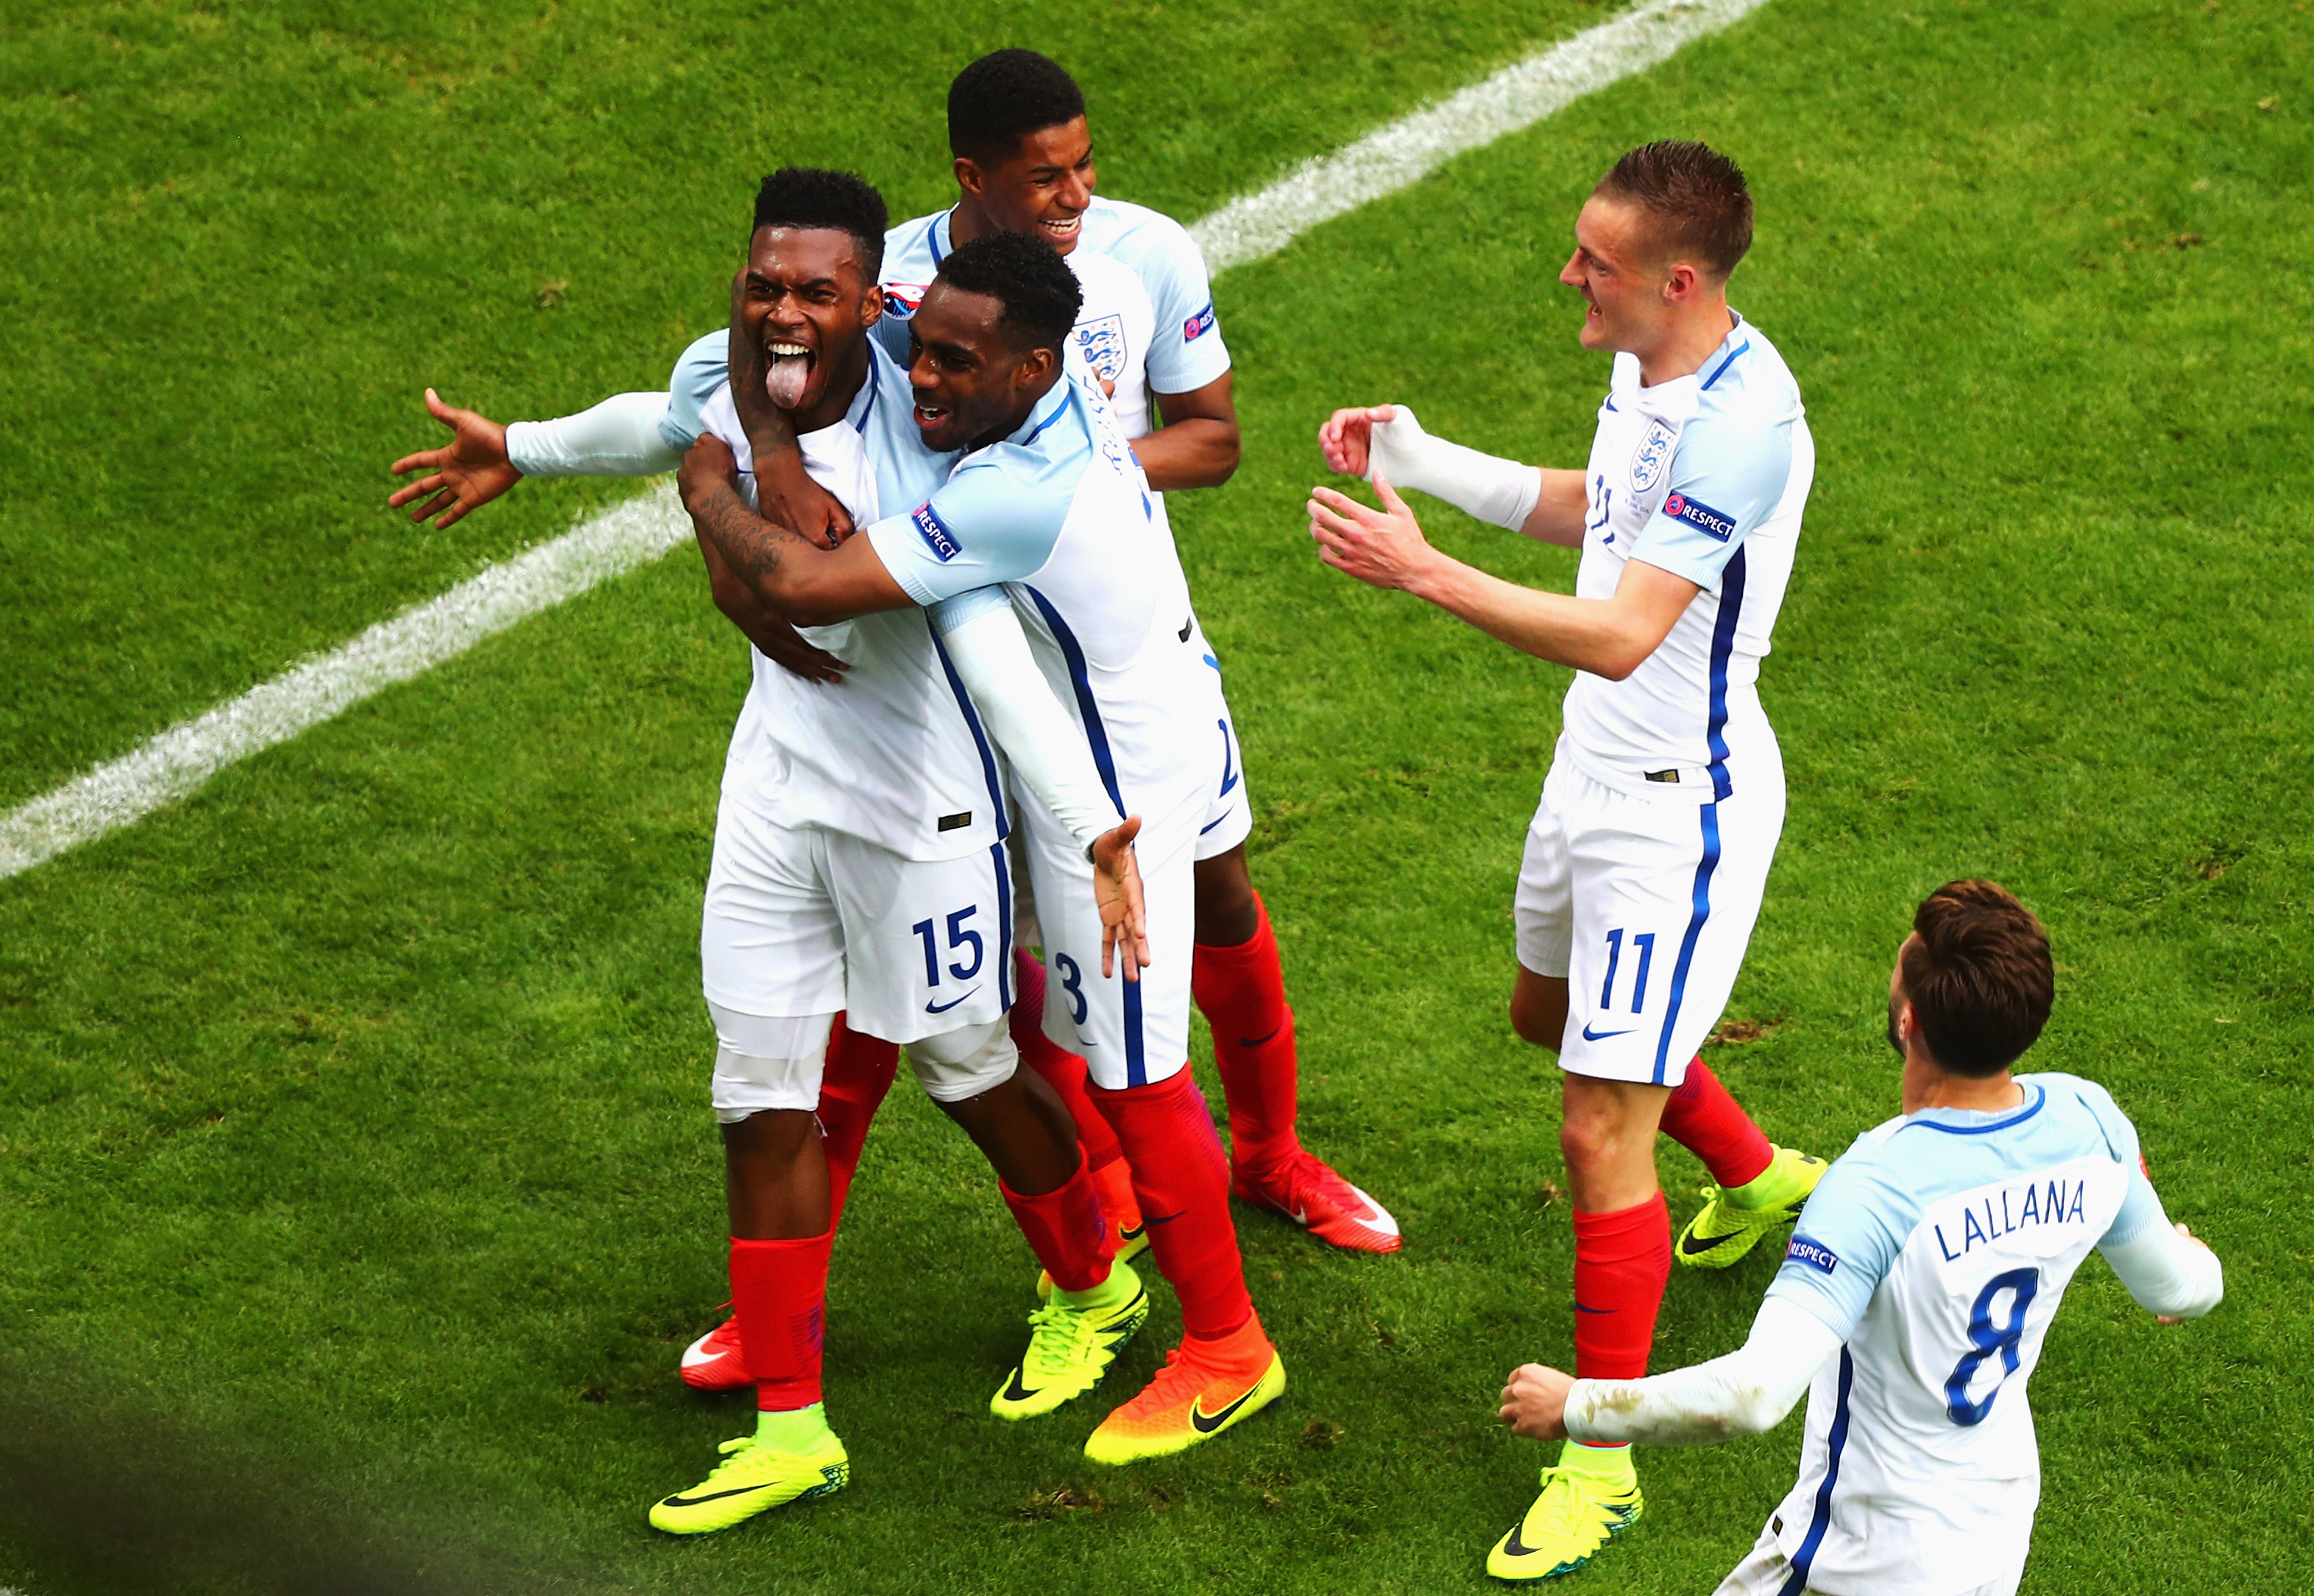 LENS, FRANCE - JUNE 16:  Daniel Sturridge (1st L) of England celebrates scoring his team's second goal with his team mates during the UEFA EURO 2016 Group B match between England and Wales at Stade Bollaert-Delelis on June 16, 2016 in Lens, France.  (Photo by Clive Rose/Getty Images)